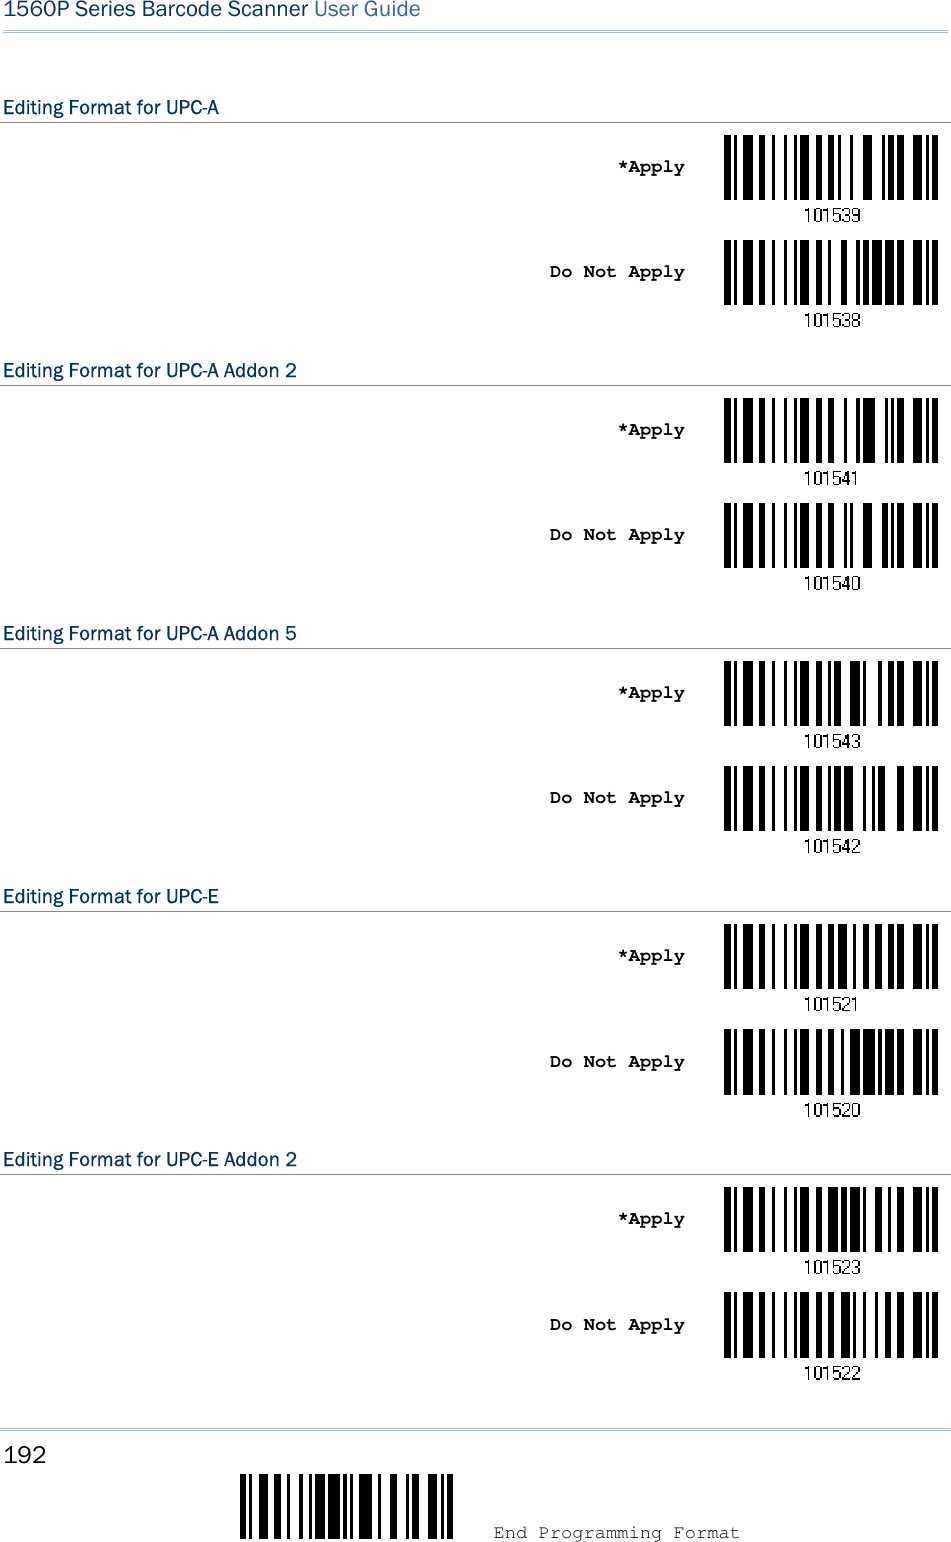 192  End Programming Format 1560P Series Barcode Scanner User Guide Editing Format for UPC-A *ApplyDo Not Apply Editing Format for UPC-A Addon 2 *ApplyDo Not Apply Editing Format for UPC-A Addon 5 *ApplyDo Not Apply Editing Format for UPC-E *ApplyDo Not Apply Editing Format for UPC-E Addon 2 *ApplyDo Not Apply 